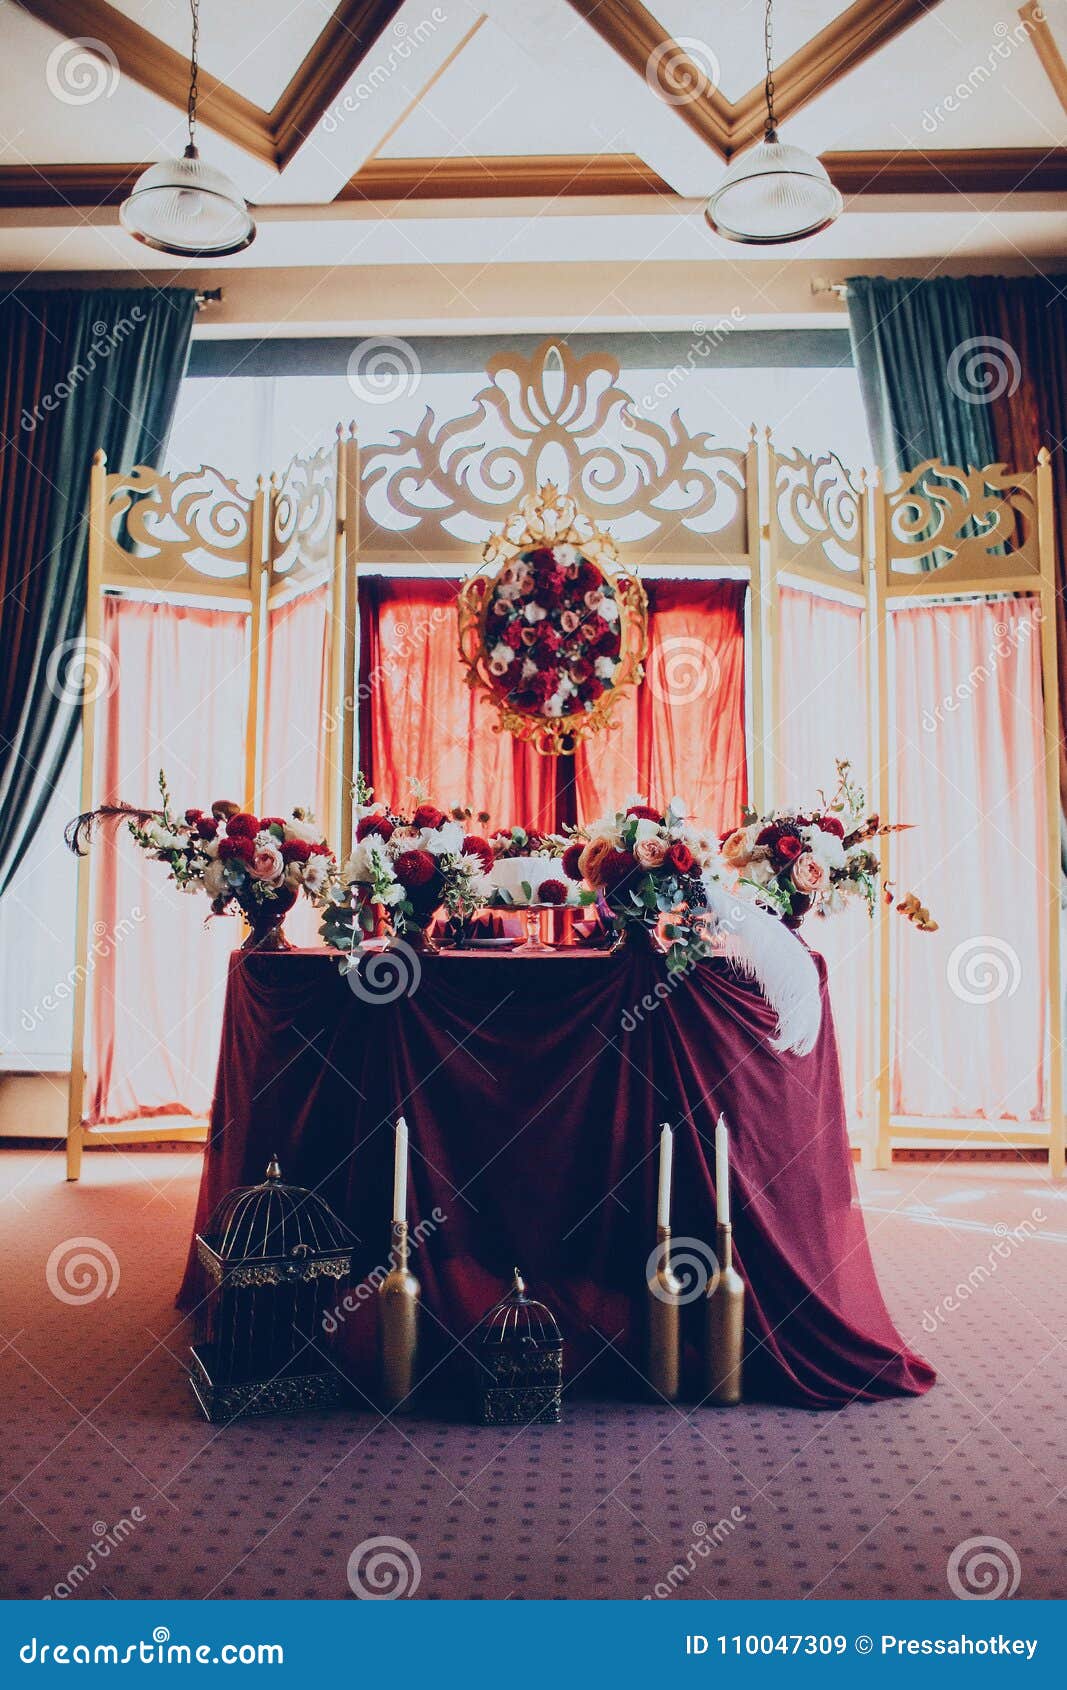 Decor of a Wedding Restaurant in Maroon Color with Flowers Stock